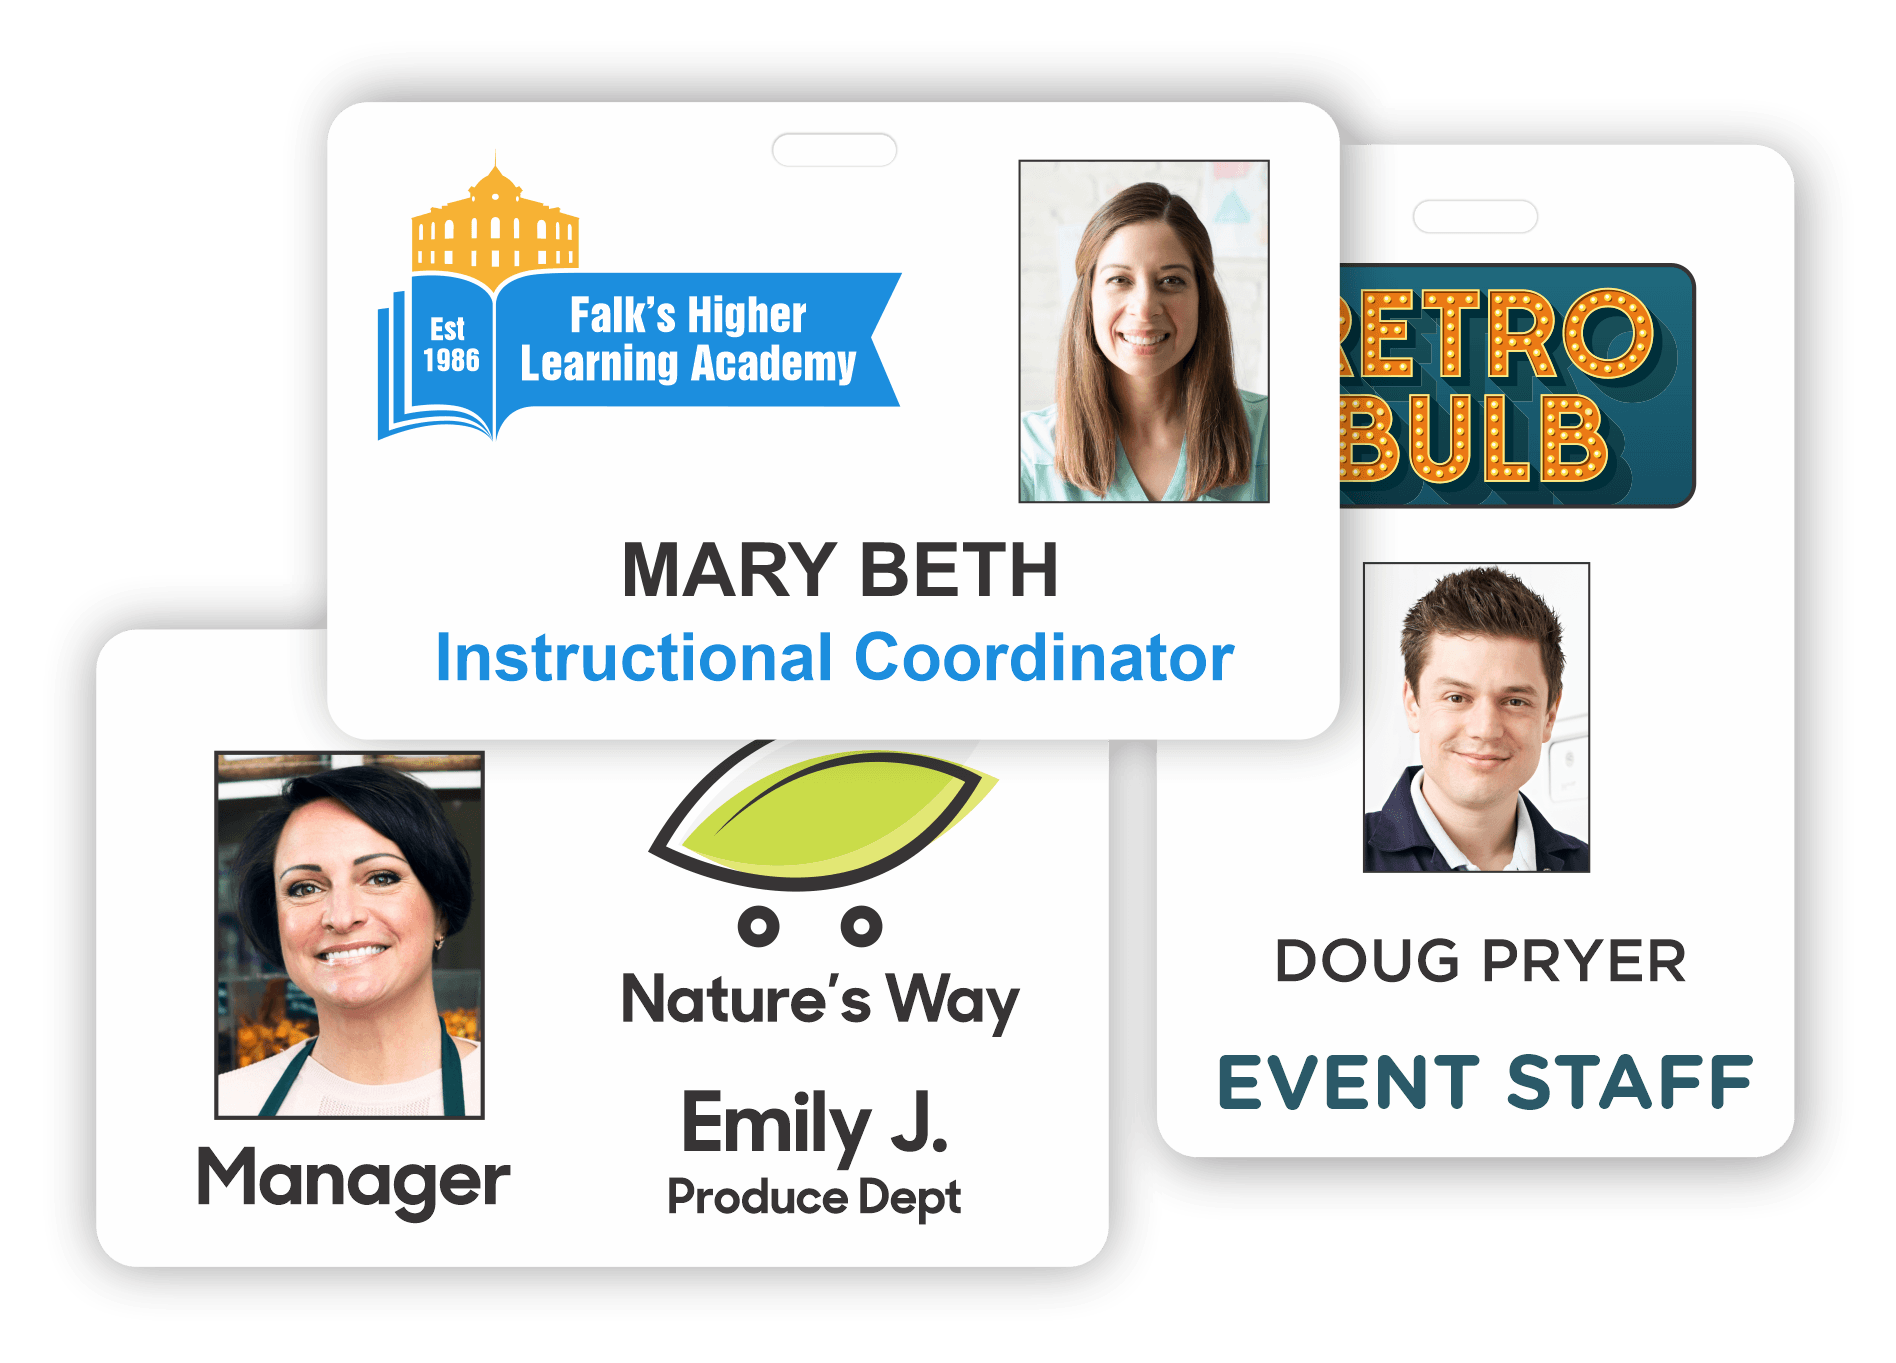 Three photo ID badges with varying logos and names/photos